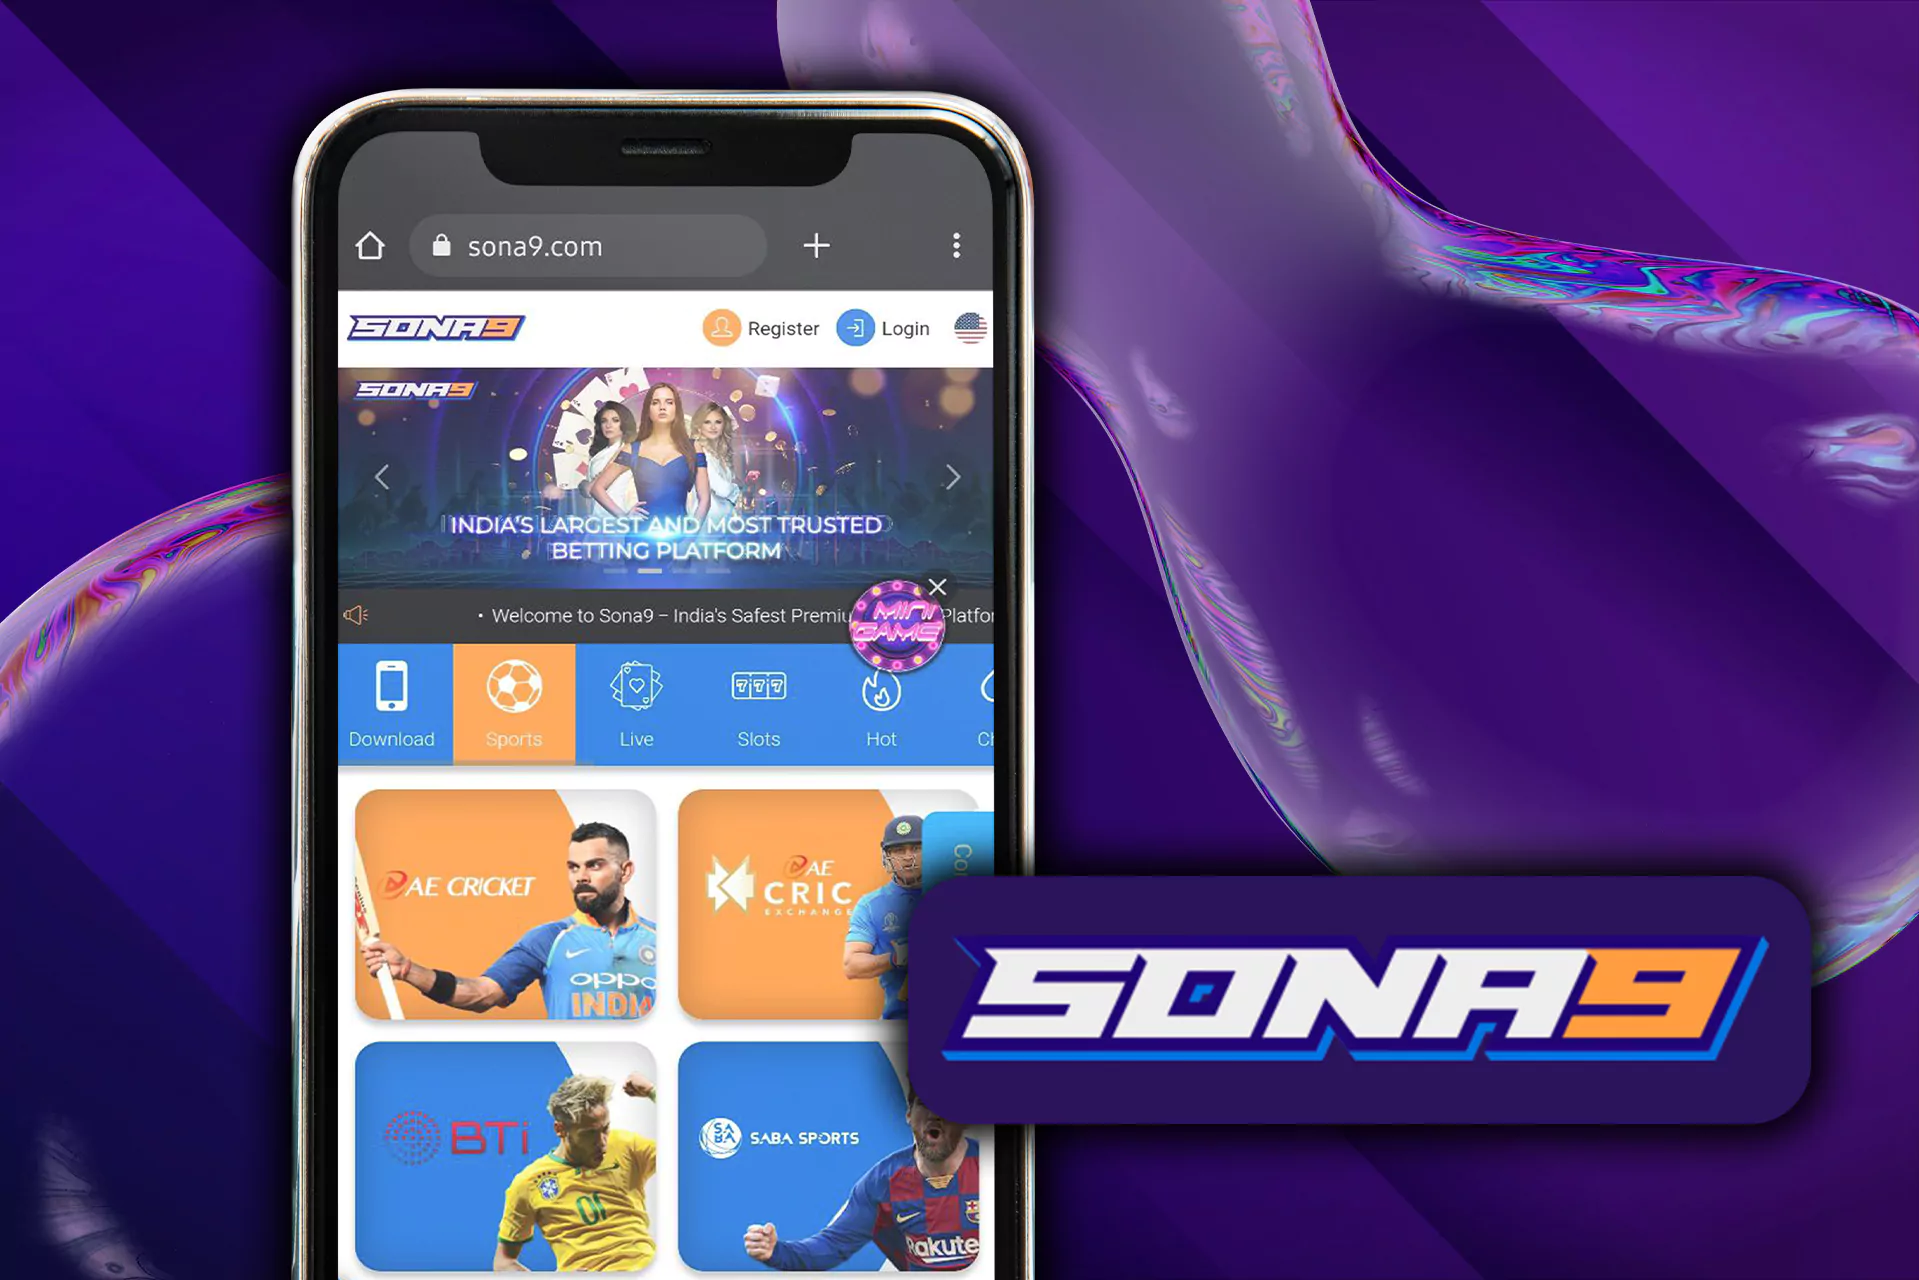 You can bet in the Sona9 mobile version instead of the app.